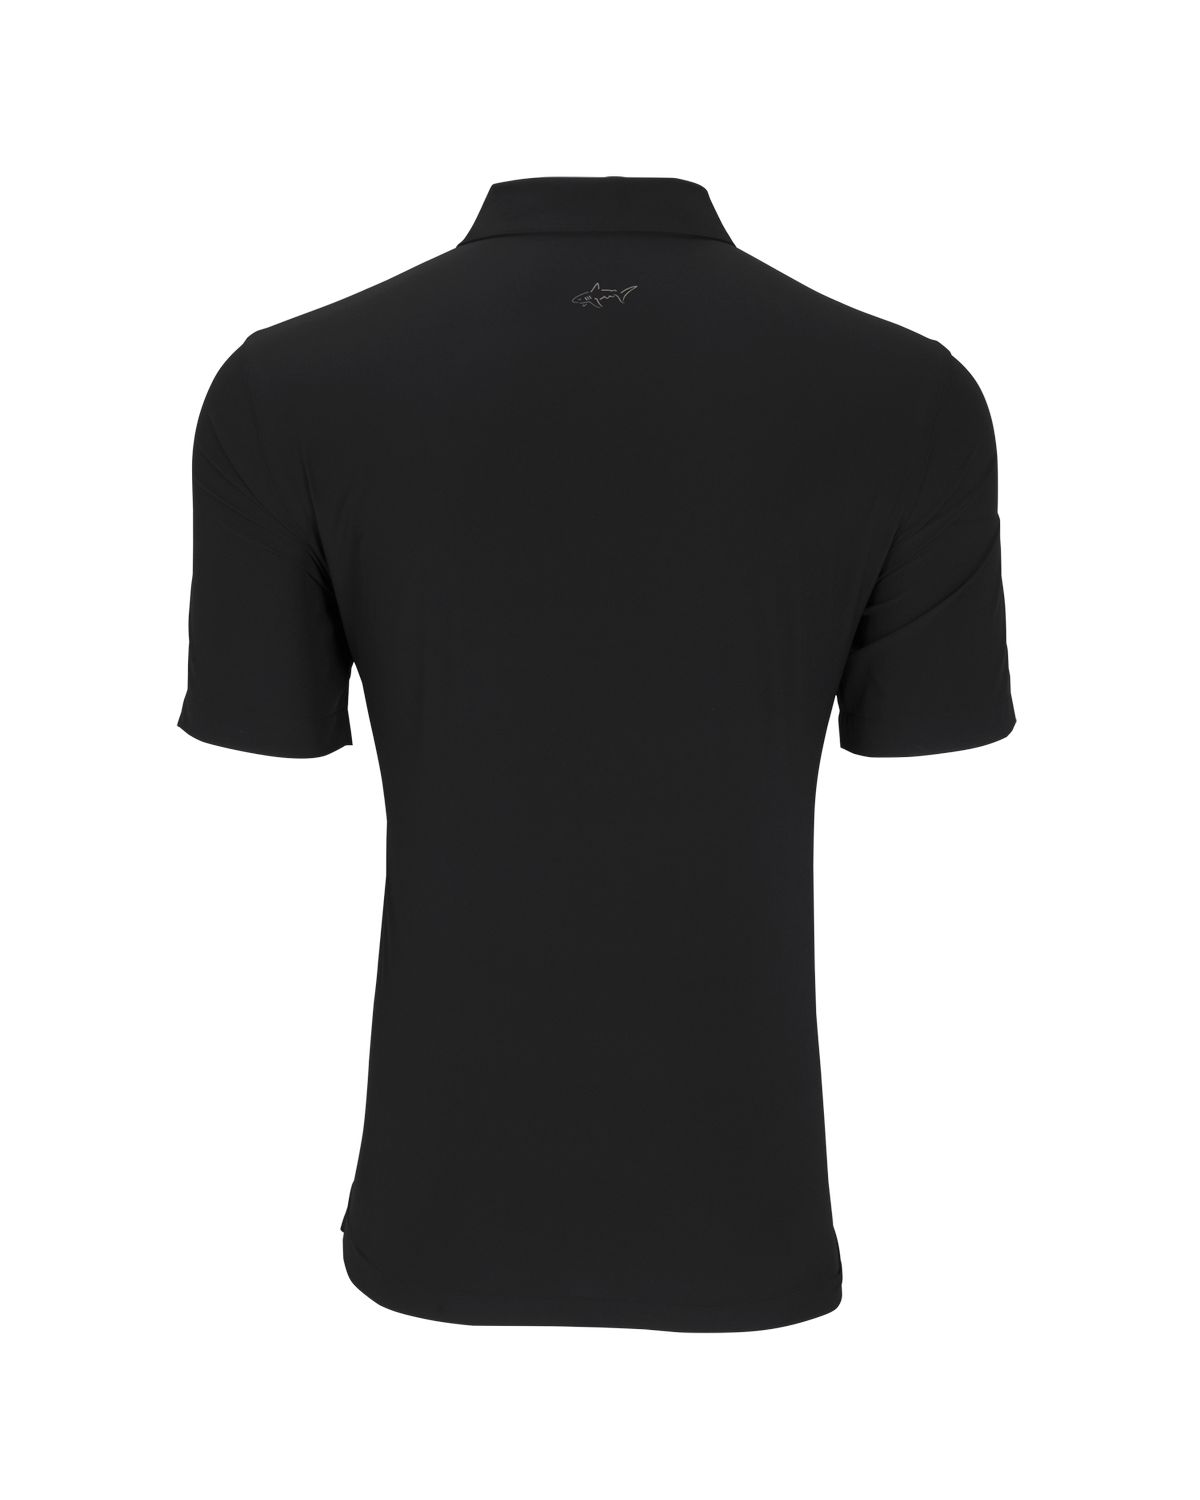 'Greg Norman GNS9W341 X-Lite 50 Solid Woven Polo'